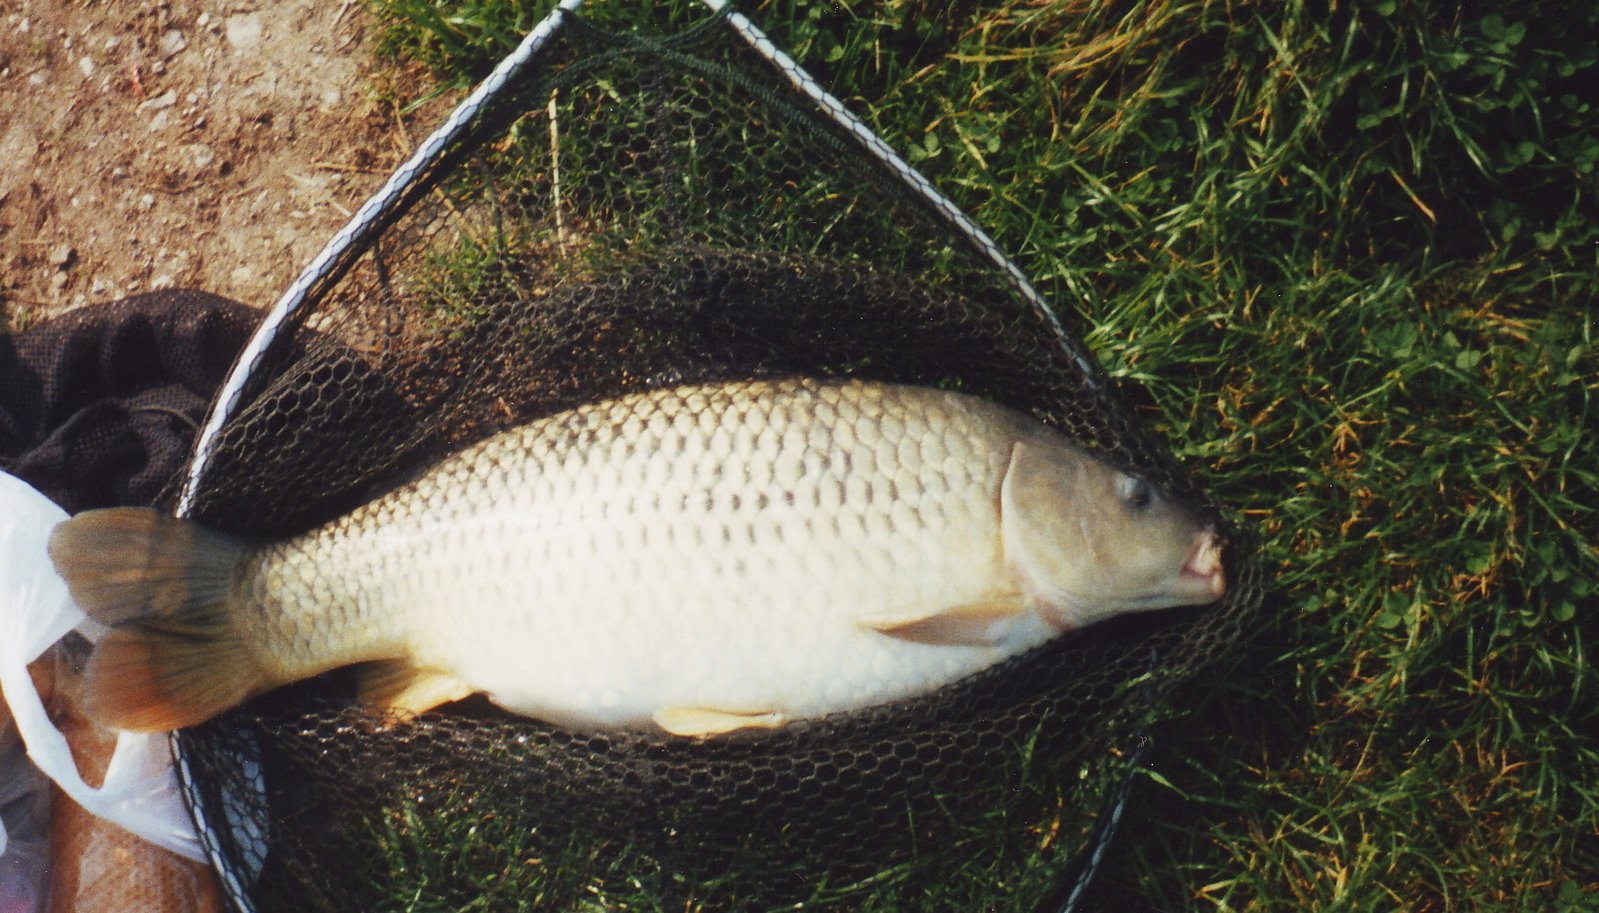 fish caught in net on grass next to a man